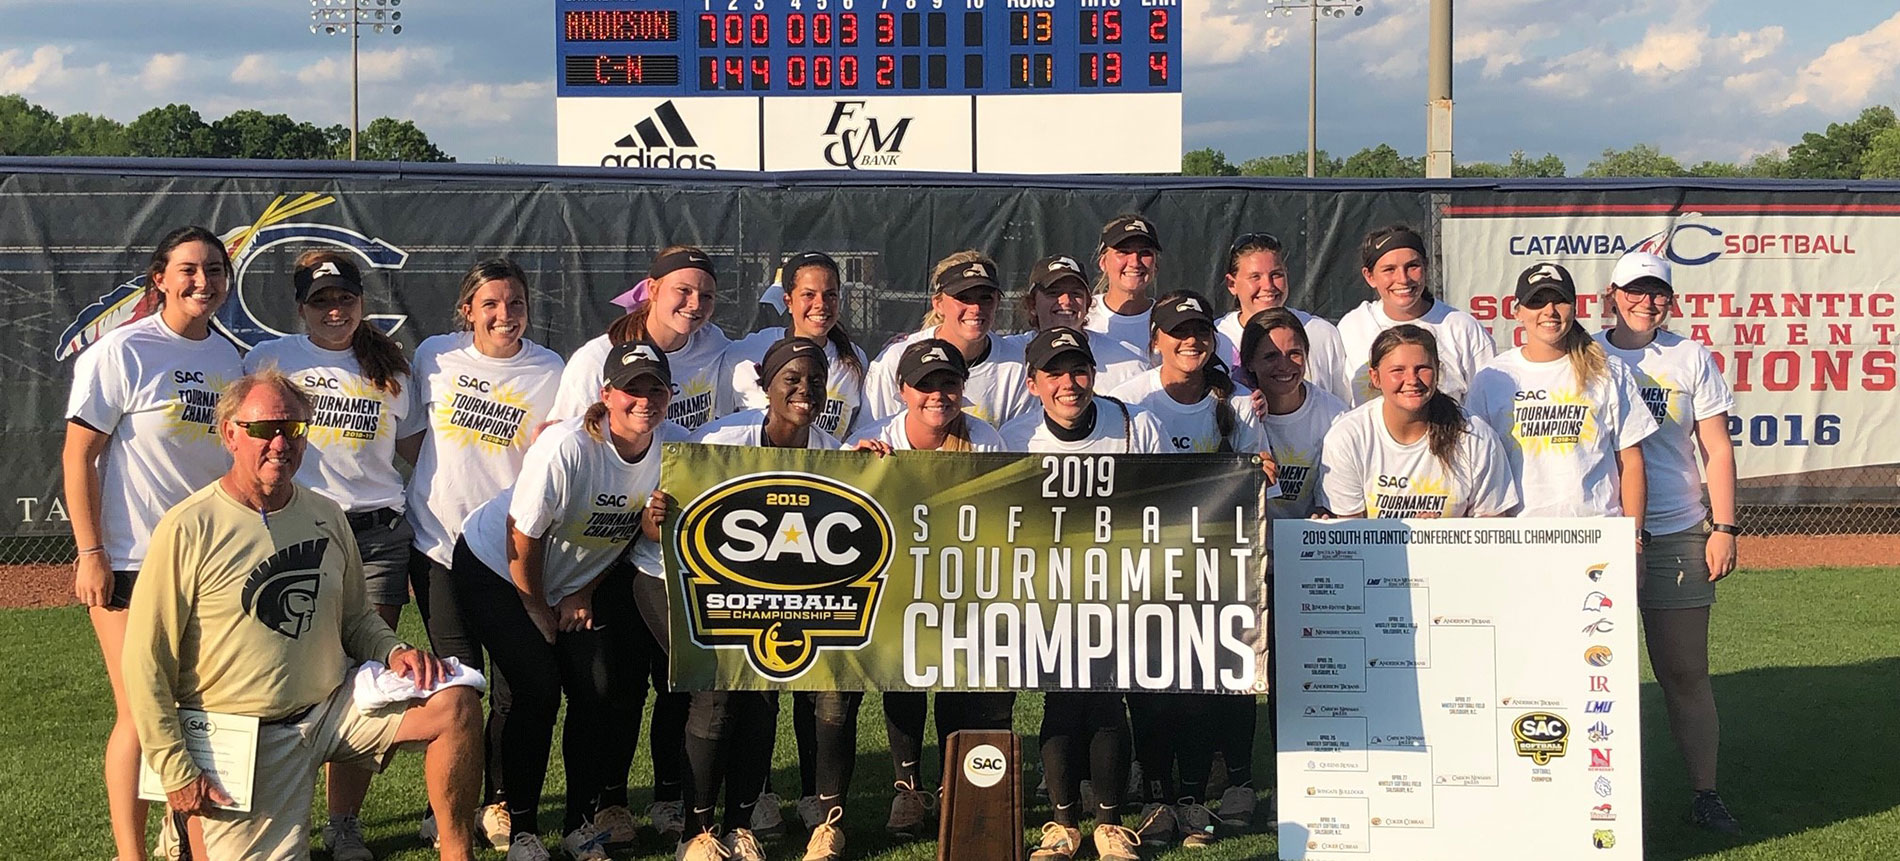 Fifth-Seeded Trojans Outplay Tourney Field to Earn South Atlantic Conference Tournament Title